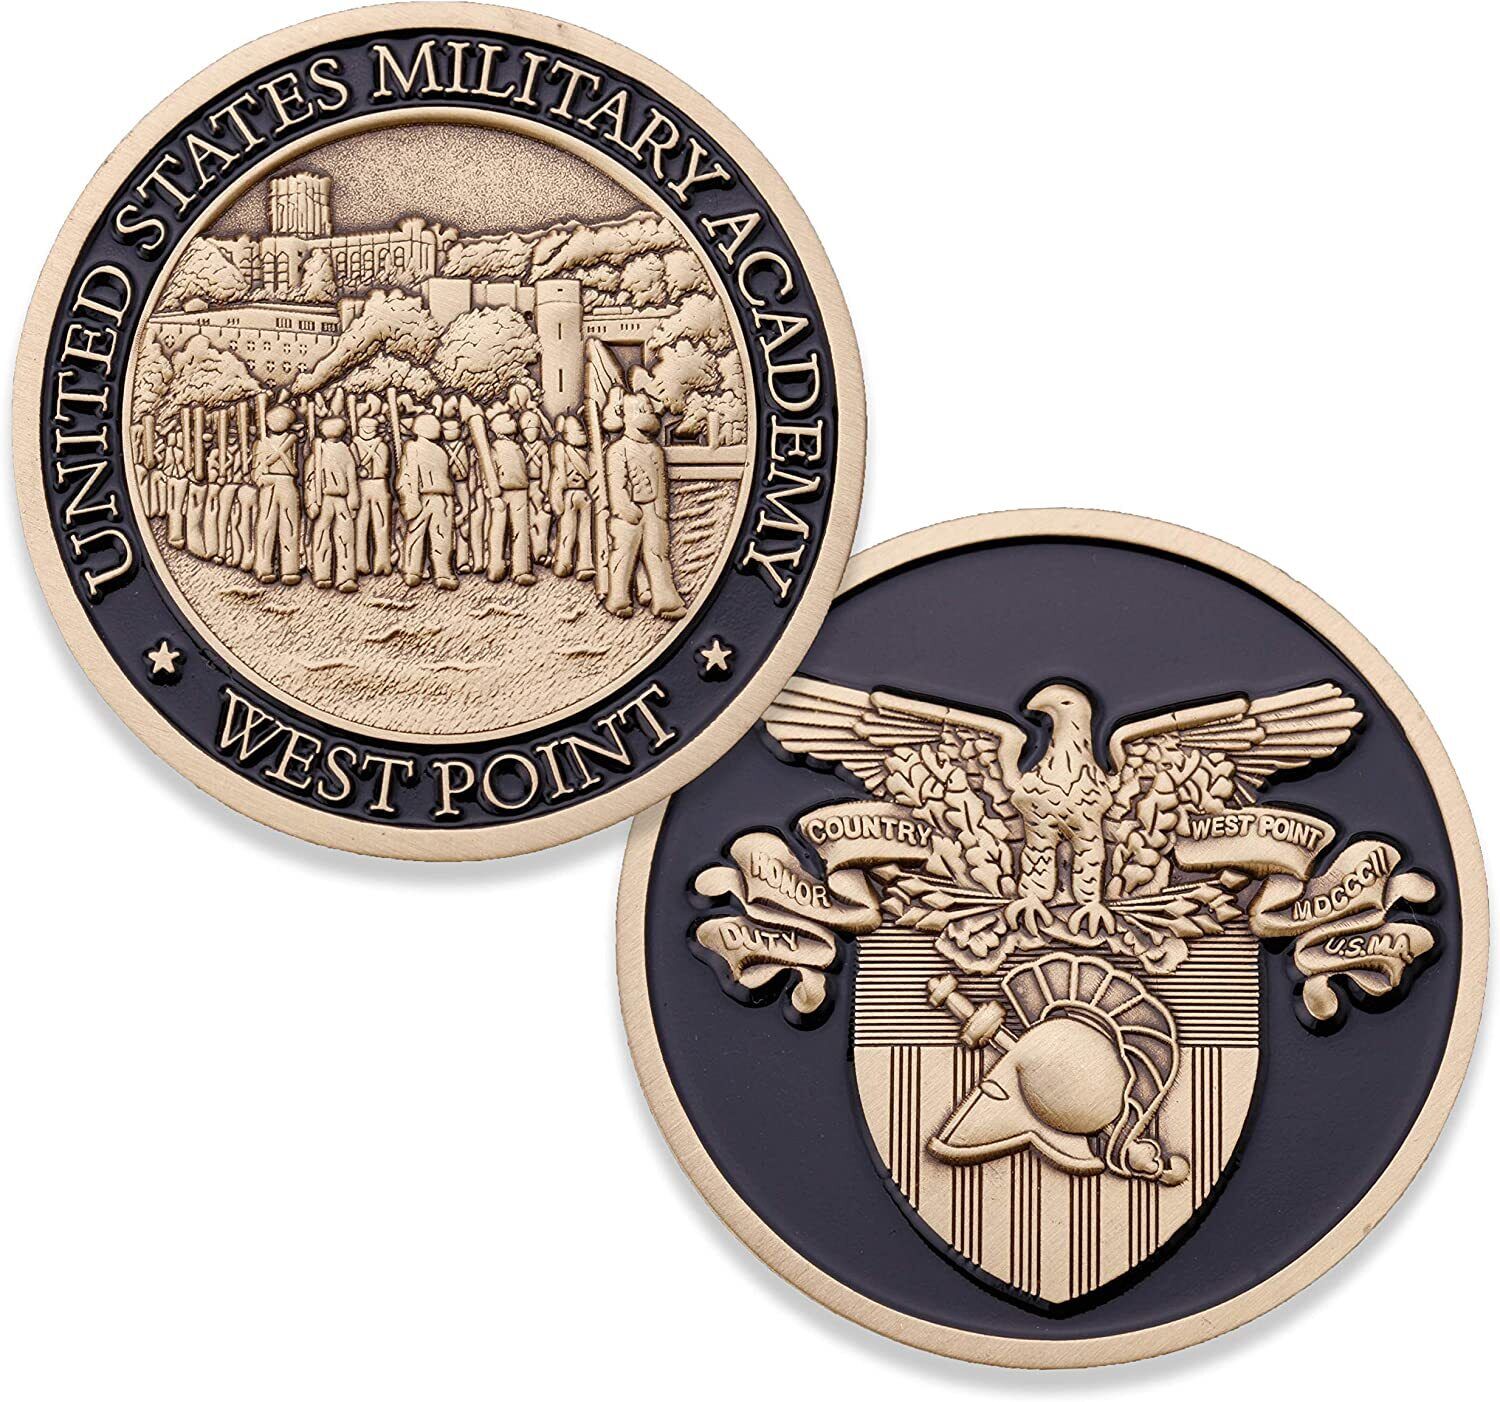 West Point Military Academy Challenge Coin